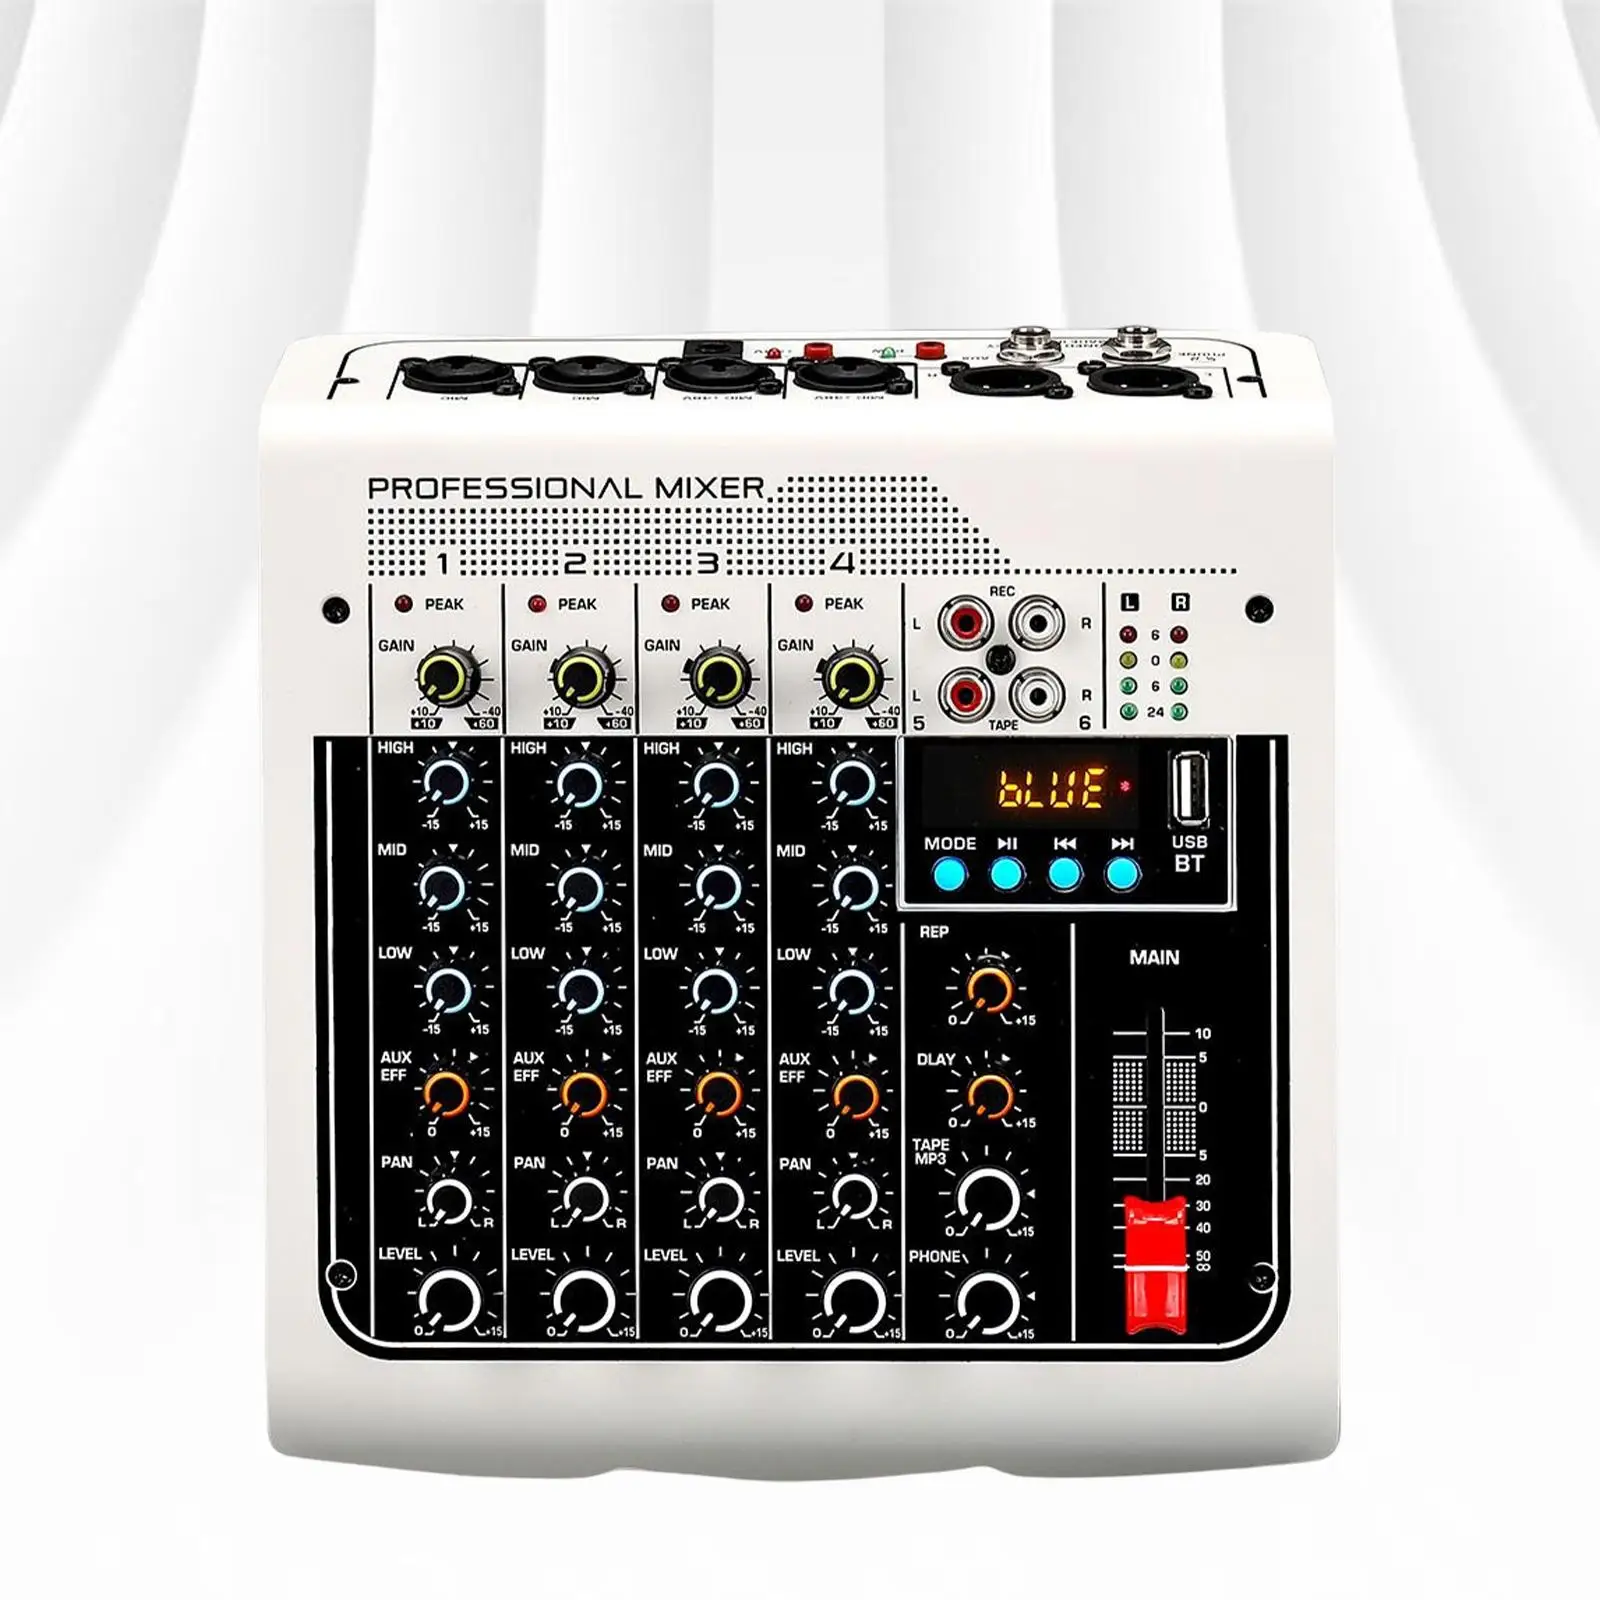 6 Channel Audio Mixer Microphone in Sound Mixing Console Headphone Jack MP3 Computer Input Stereo for Podcasting Party Recording